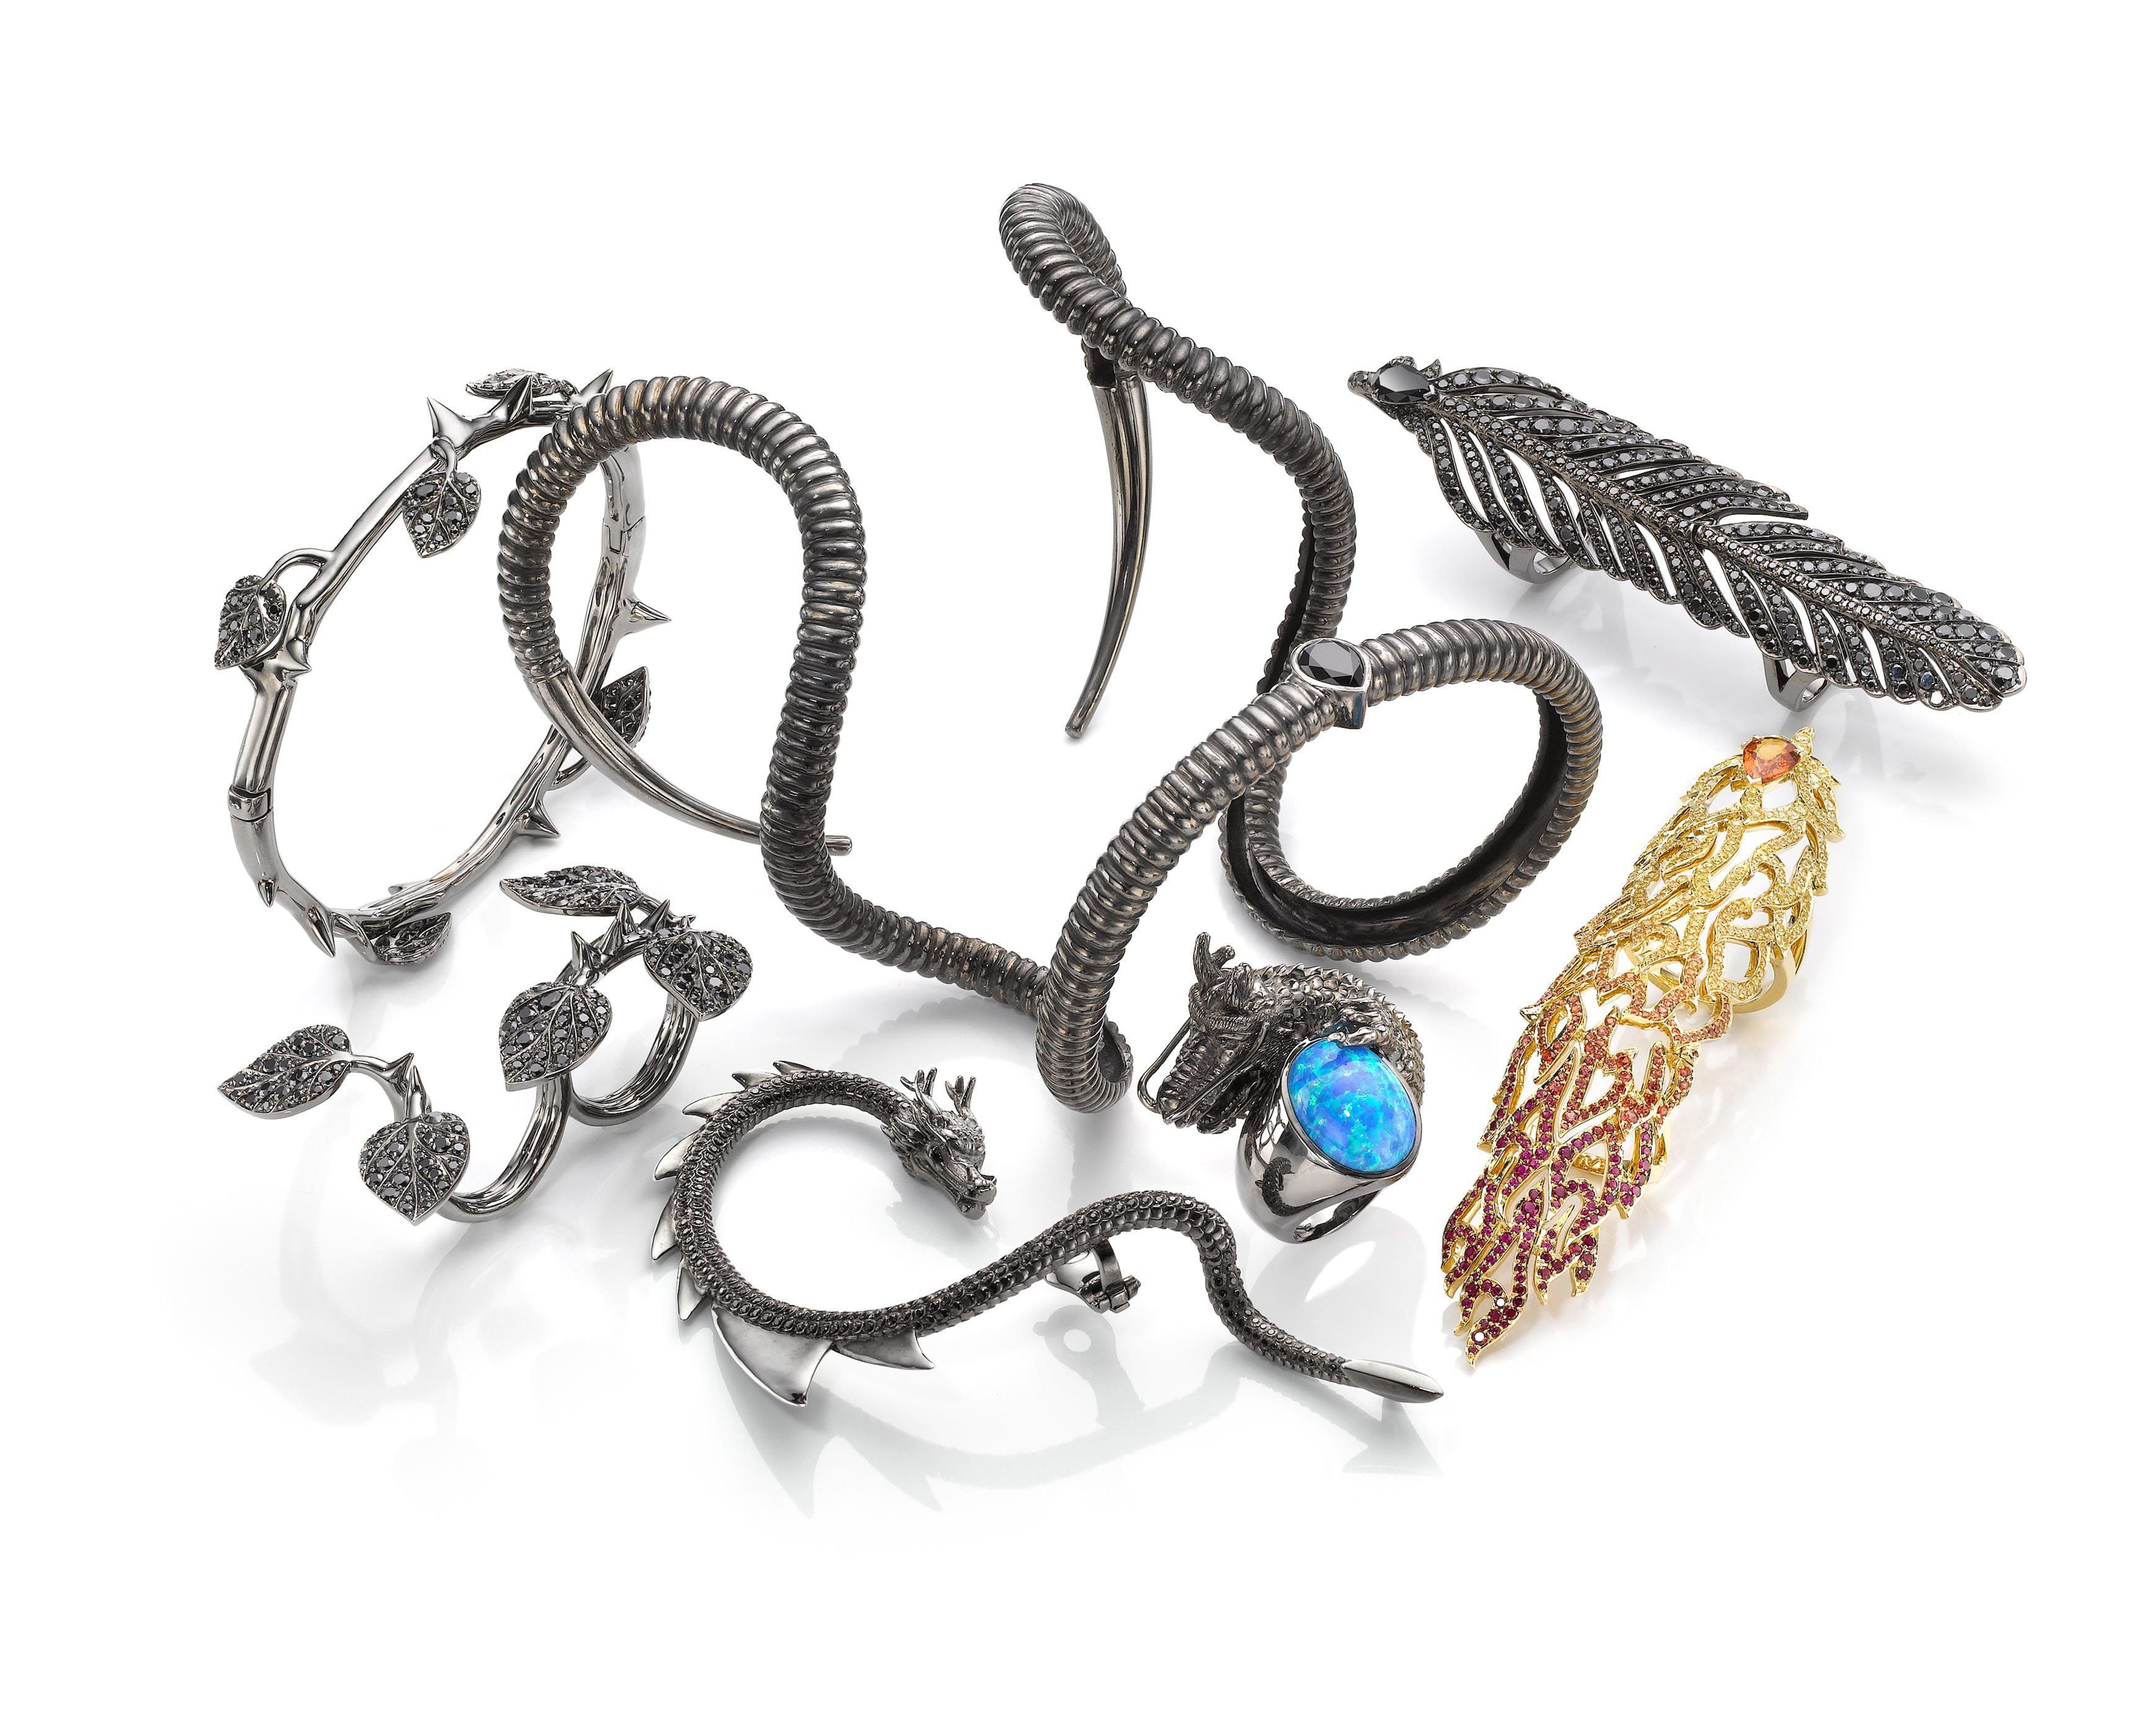 Disney Consumer Products
Crow's Nest Jewels has joined forces with Walt Disney Pictures to create an exclusive limited edition collection for &quot;Maleficent.&quot;